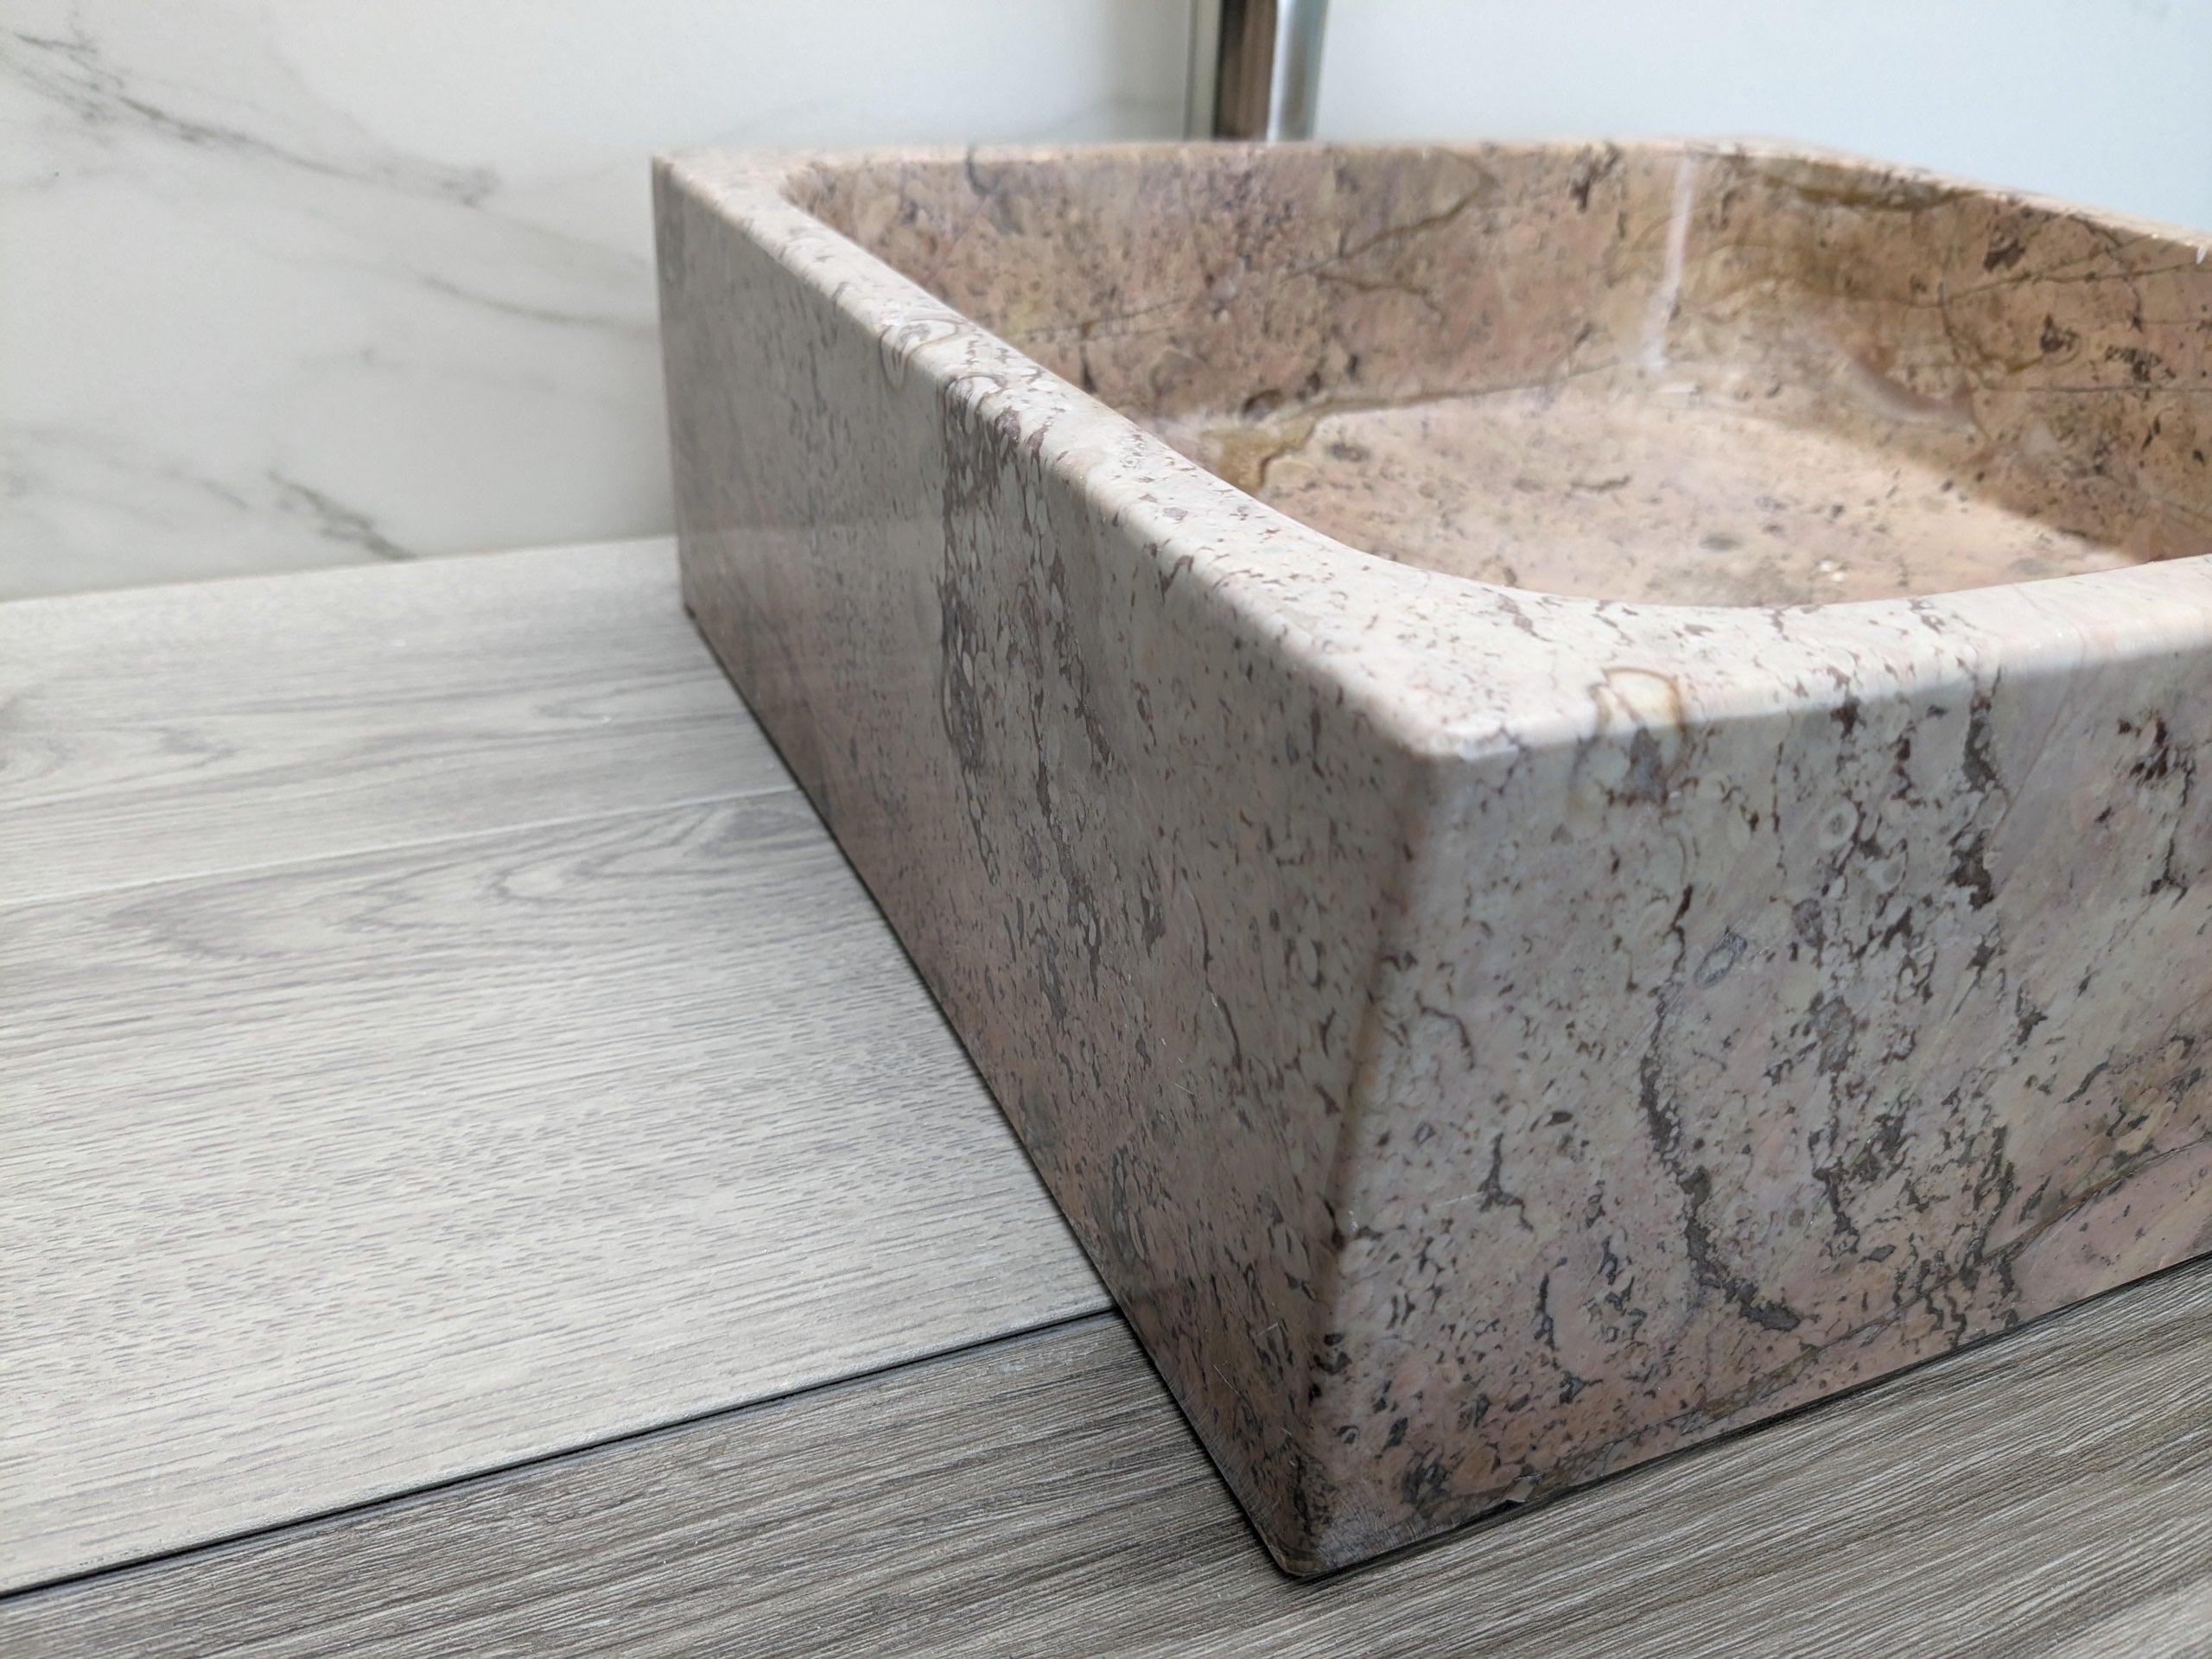 Pink Marble Vessel Sink. A one of a kind piece. Handmade in Mexico. We hand finish, package, and ship from the USA. Buy now at www.felipeandgrace.com. 